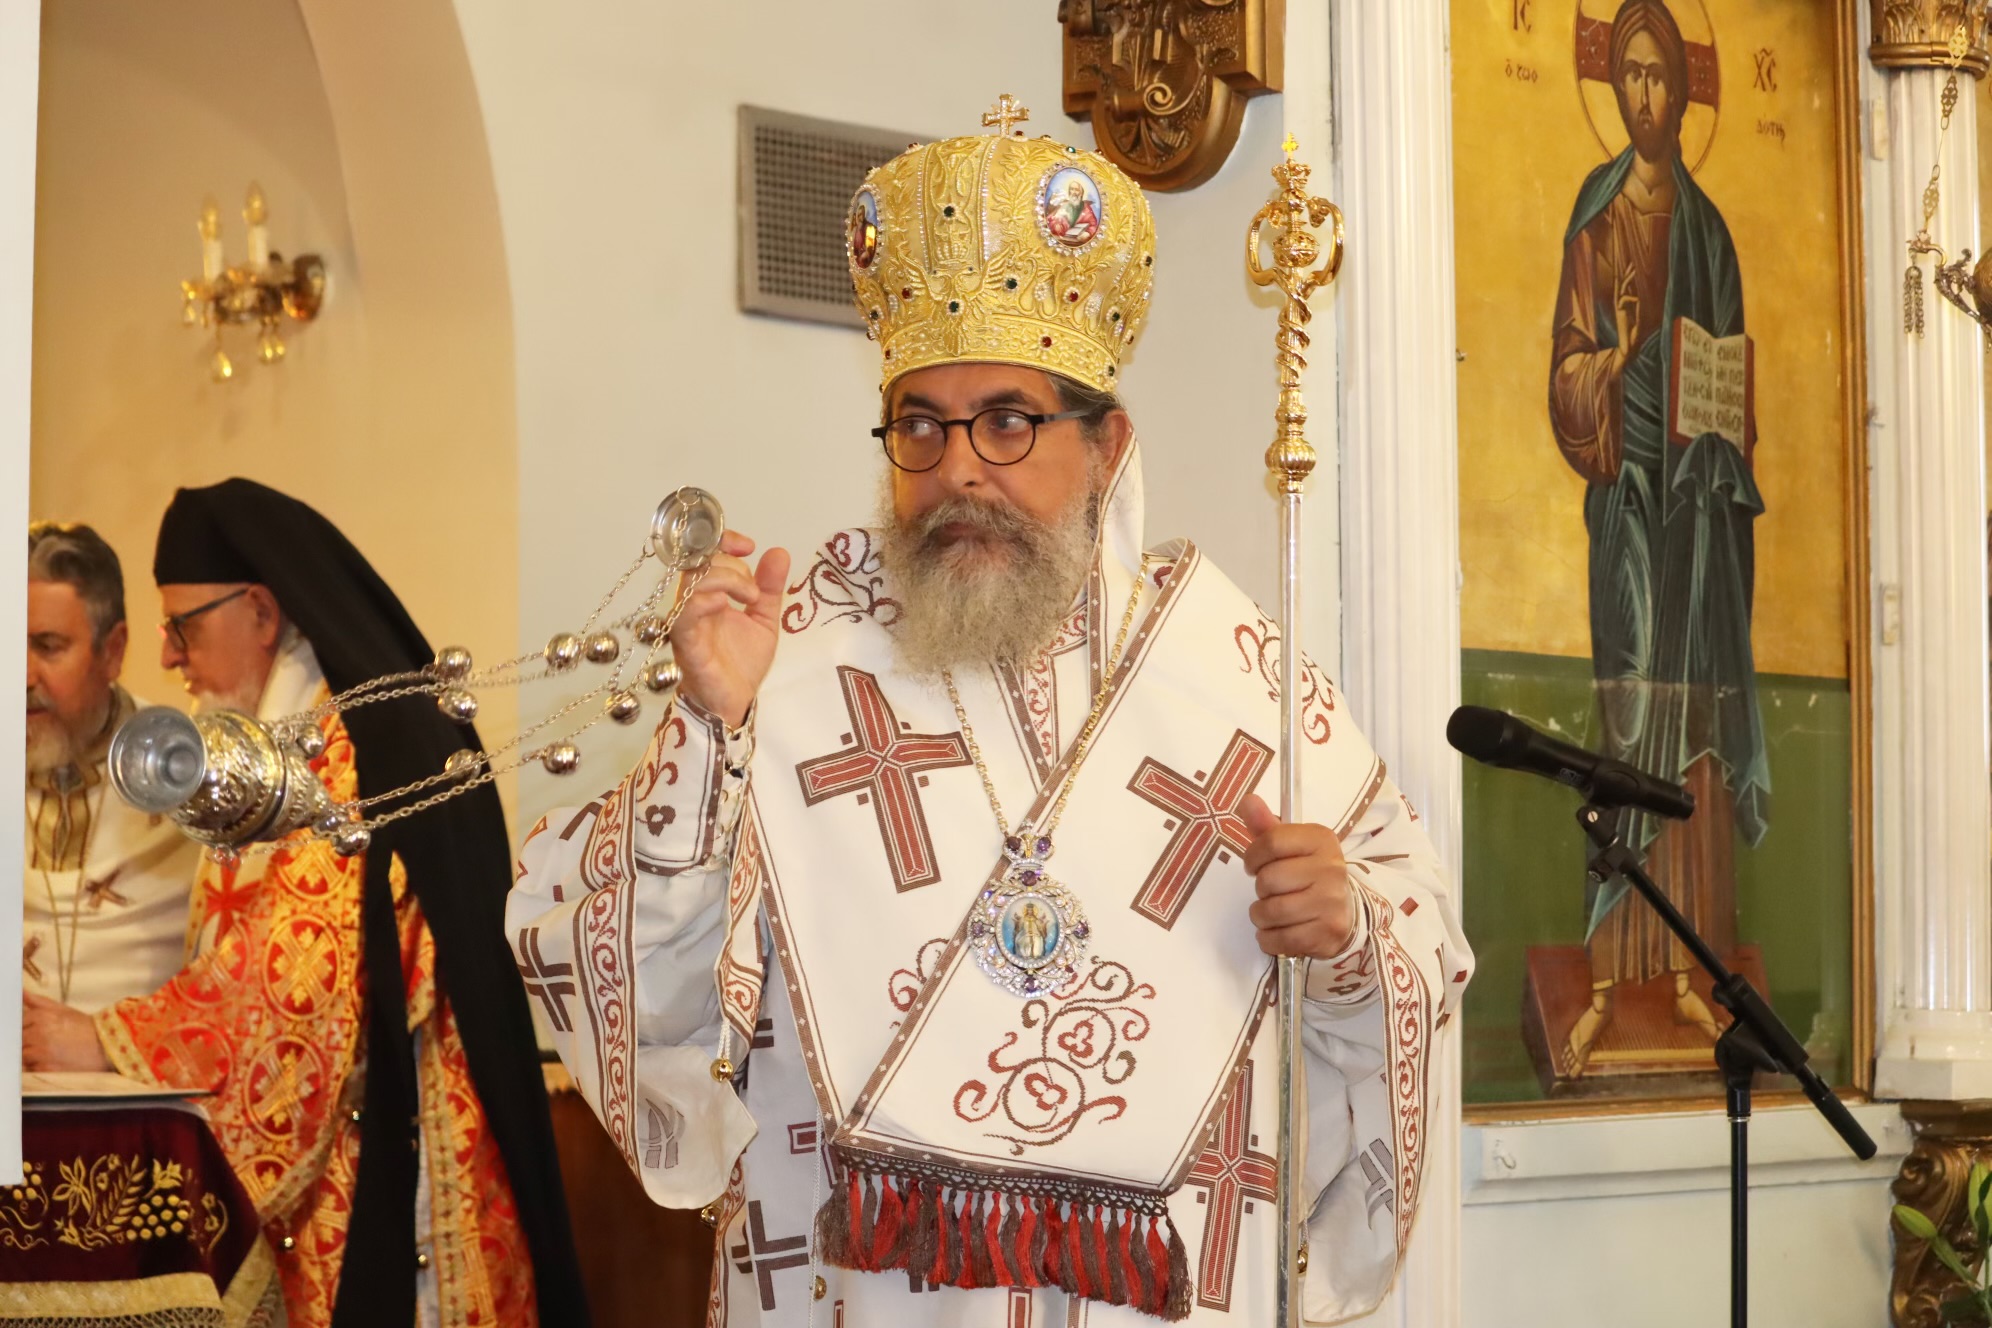 The Feast Day of the Church of The Three Hierarchs in Clayton, Melbourne